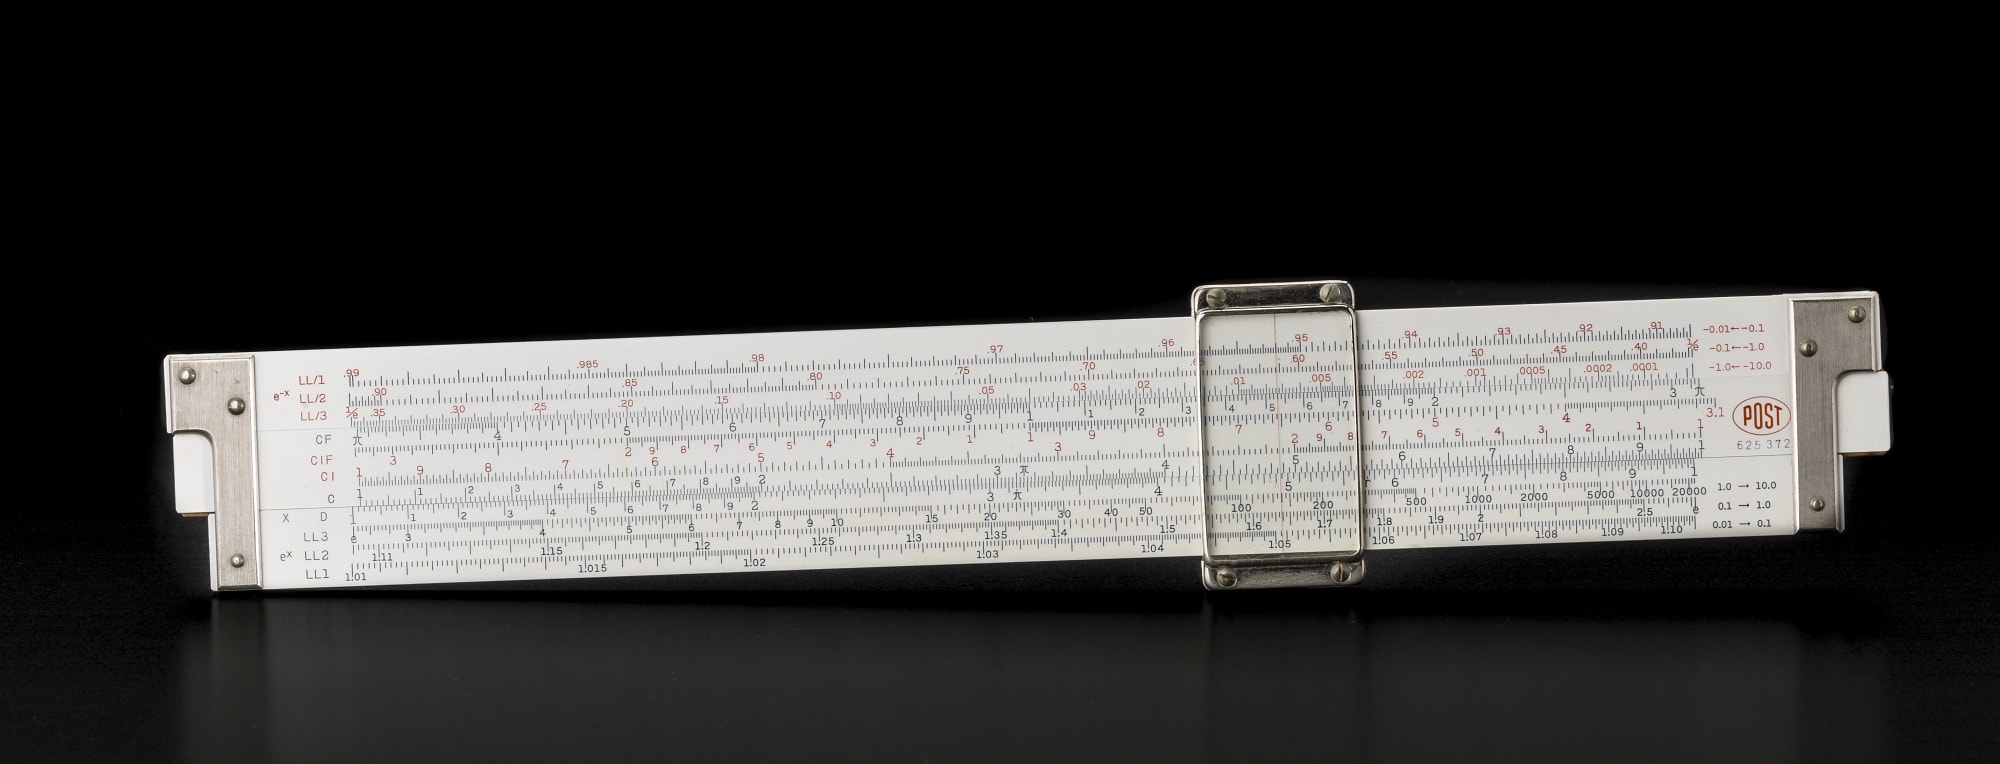 Slide rule owned by Sally Ride, the first American woman in space.